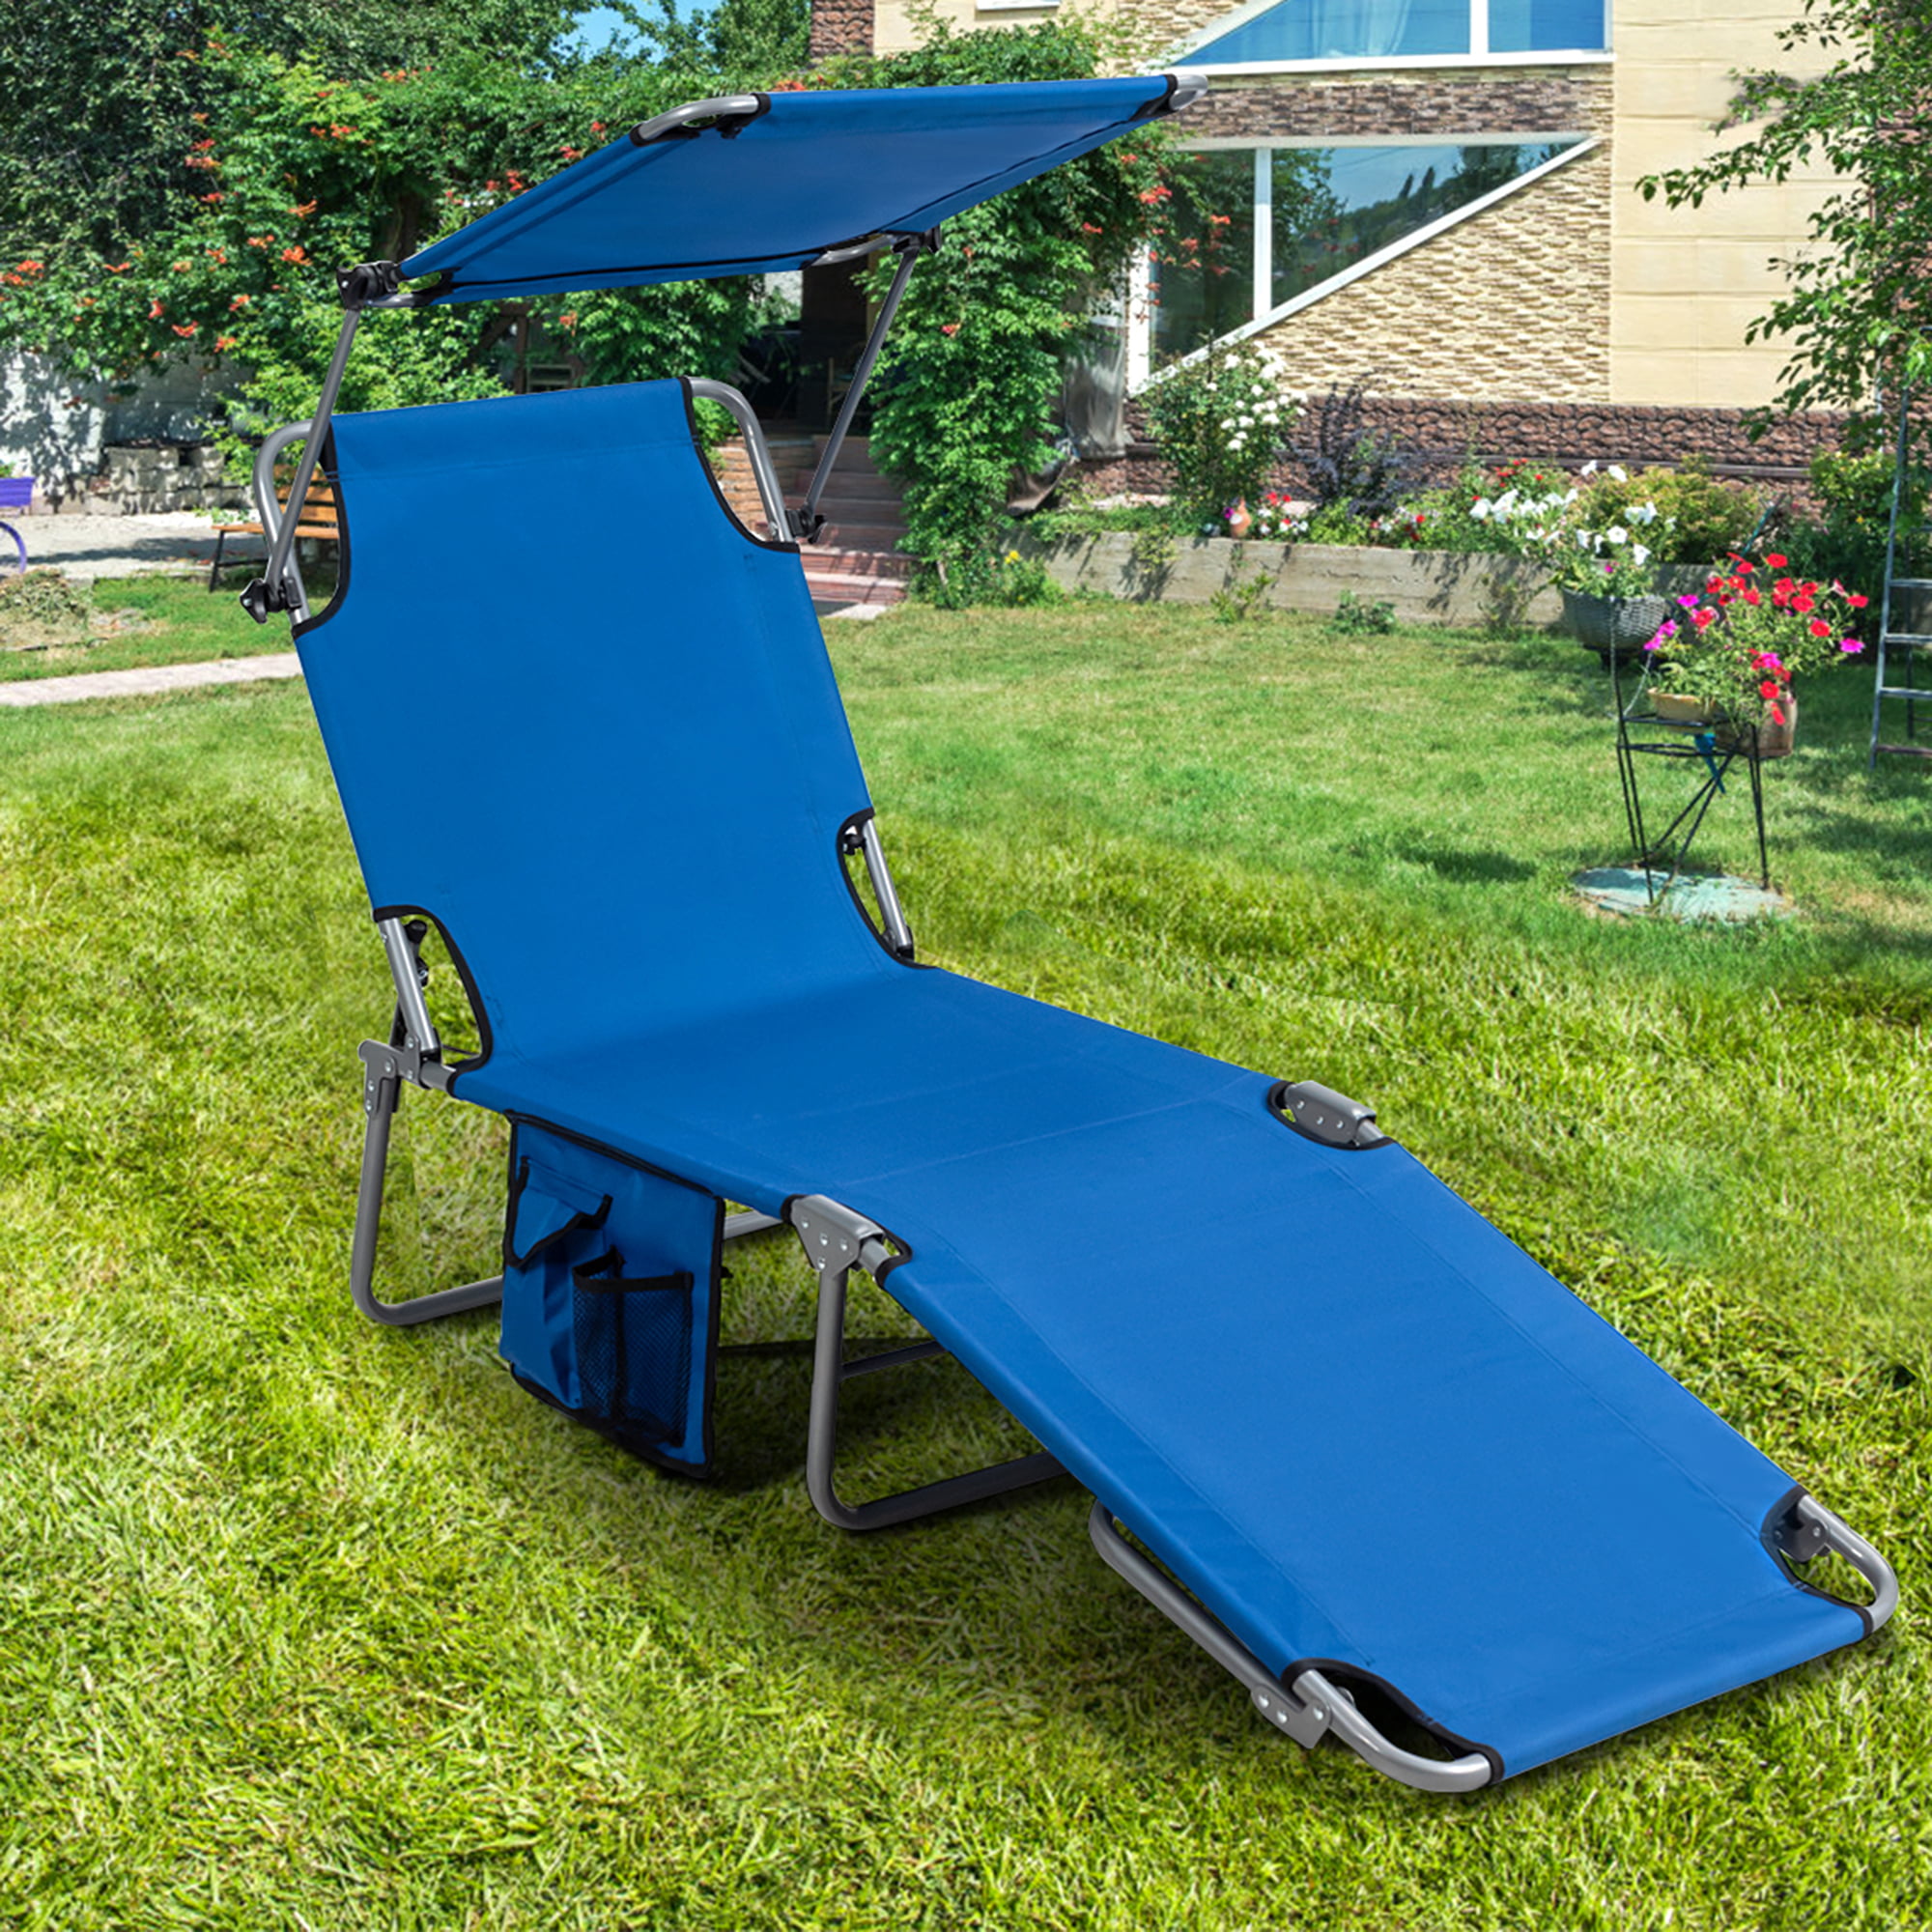 Gymax Foldable Lounge Chair Adjustable Outdoor Beach Patio